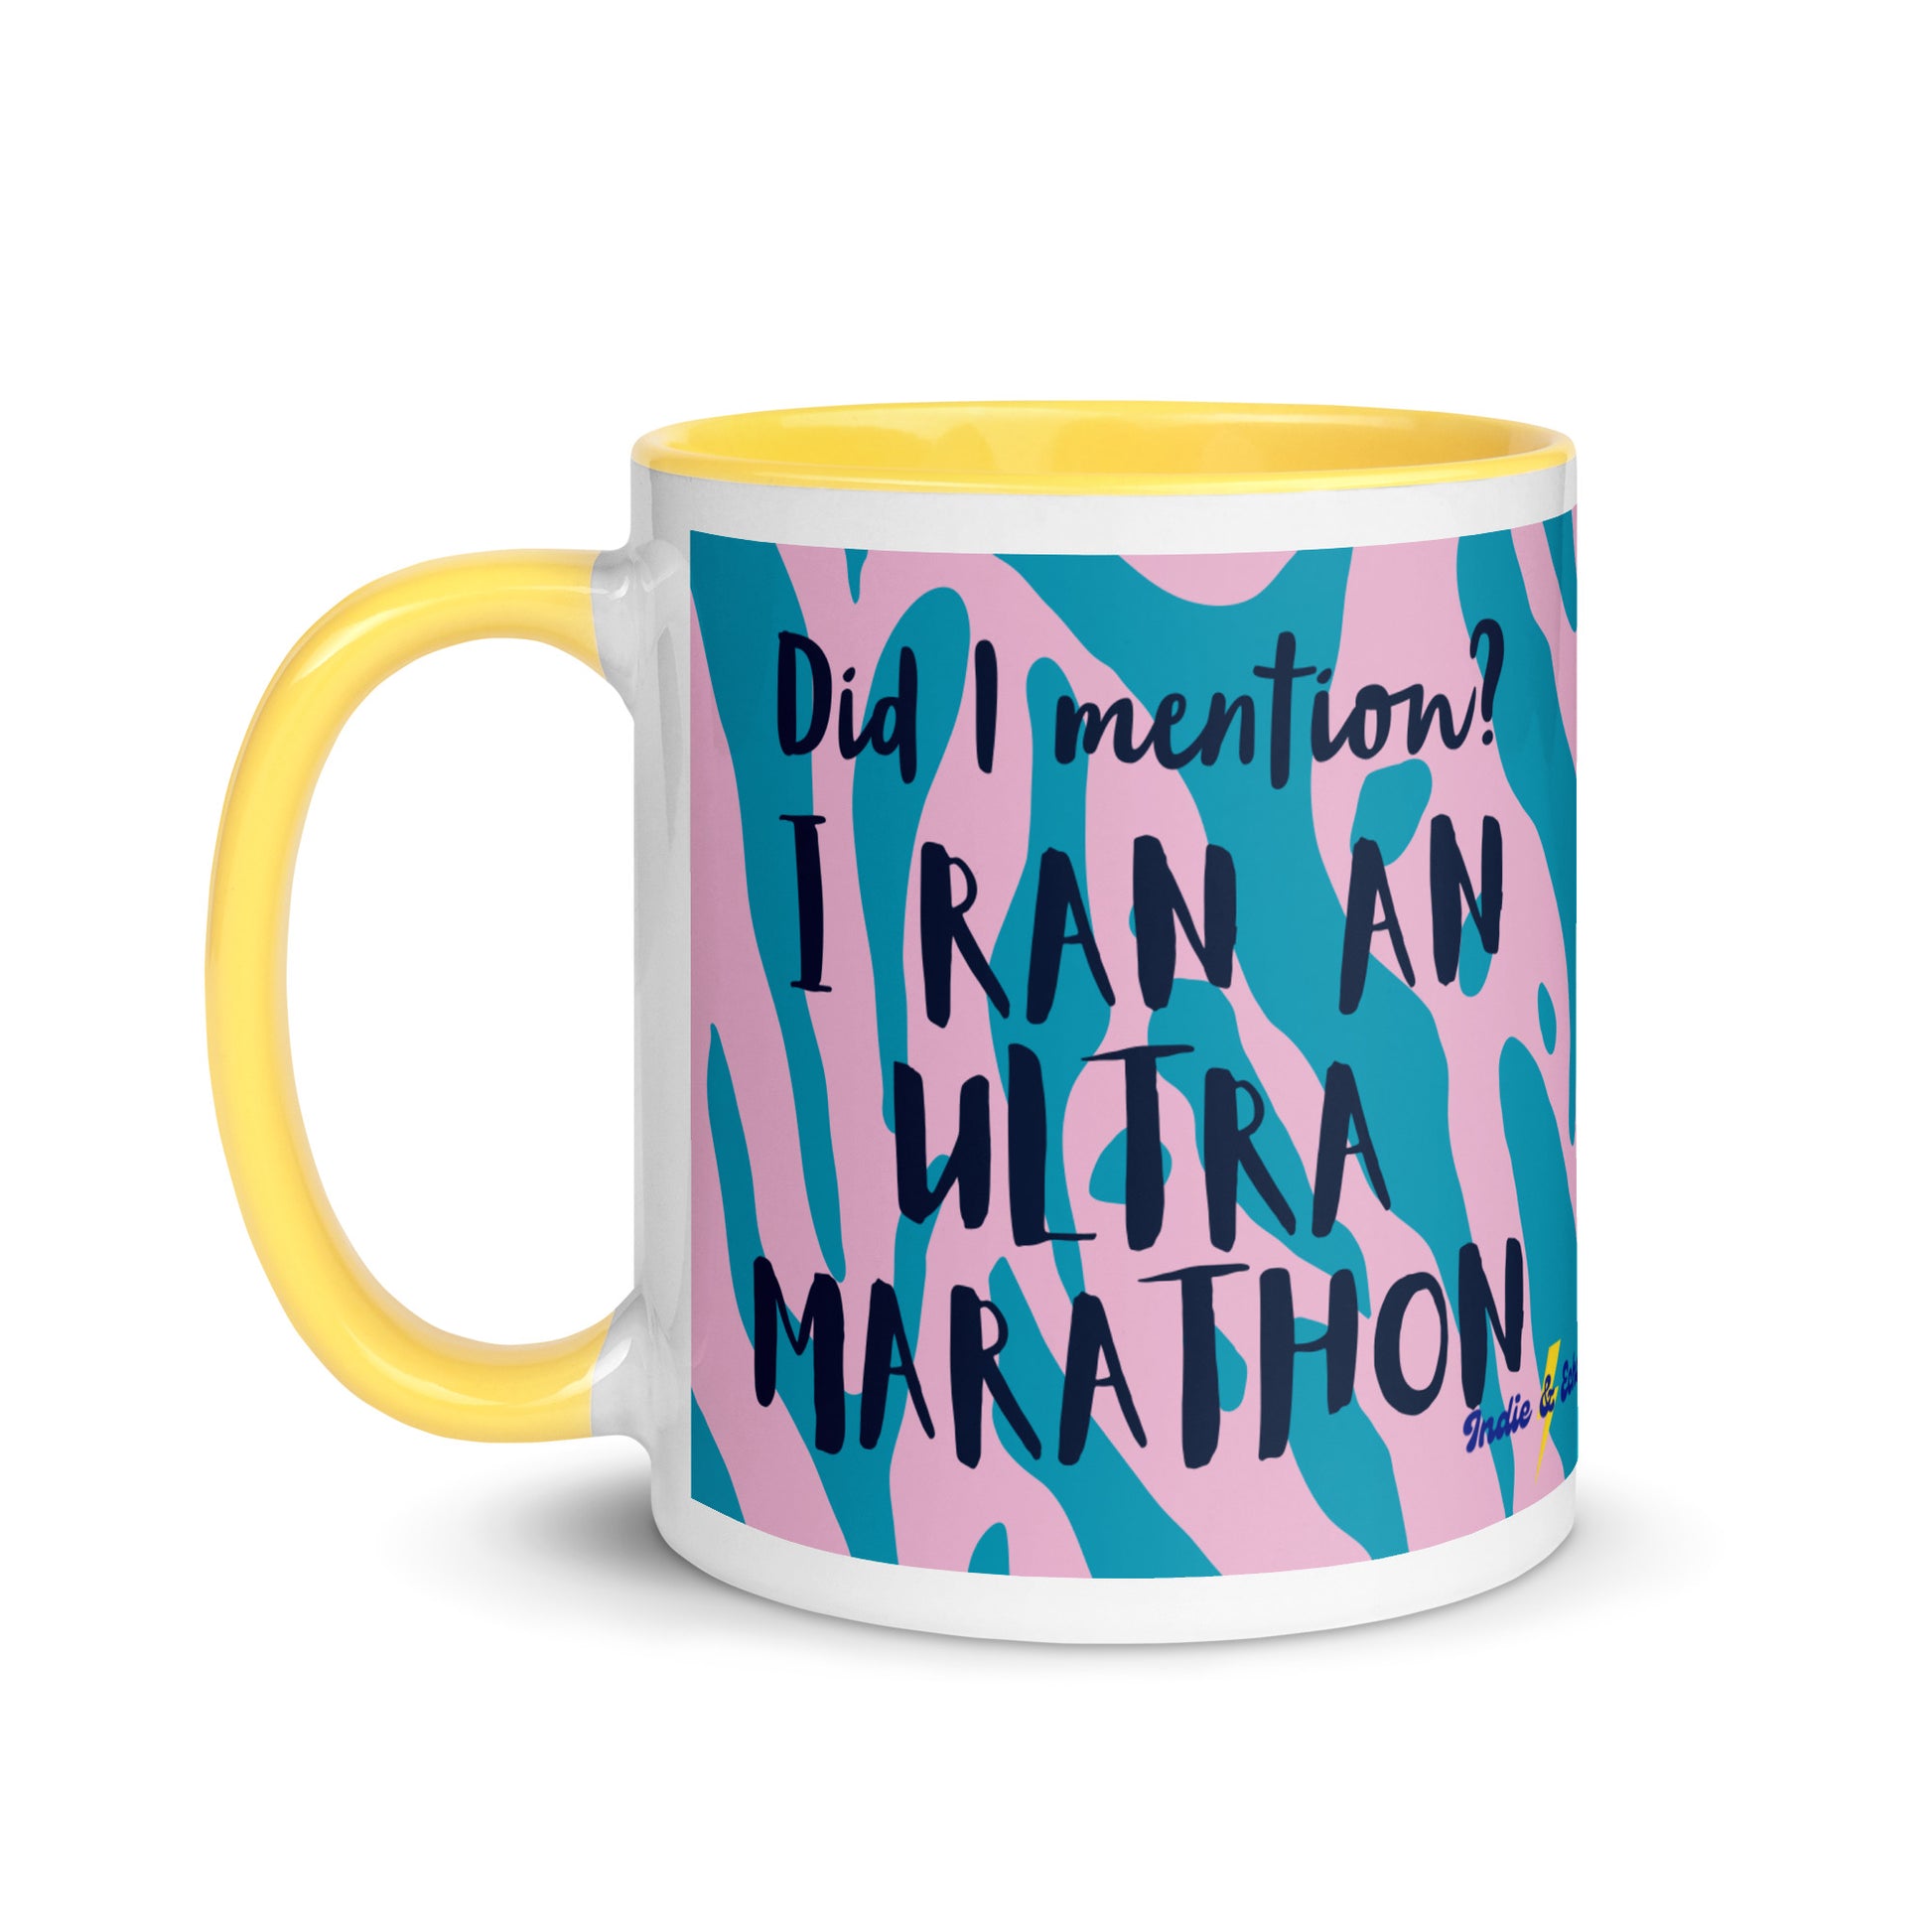 coffee mug with yellow handle and rim, with the words did i mention? i ran an ultra marathon. a gift for people who have completed an ultra marathon